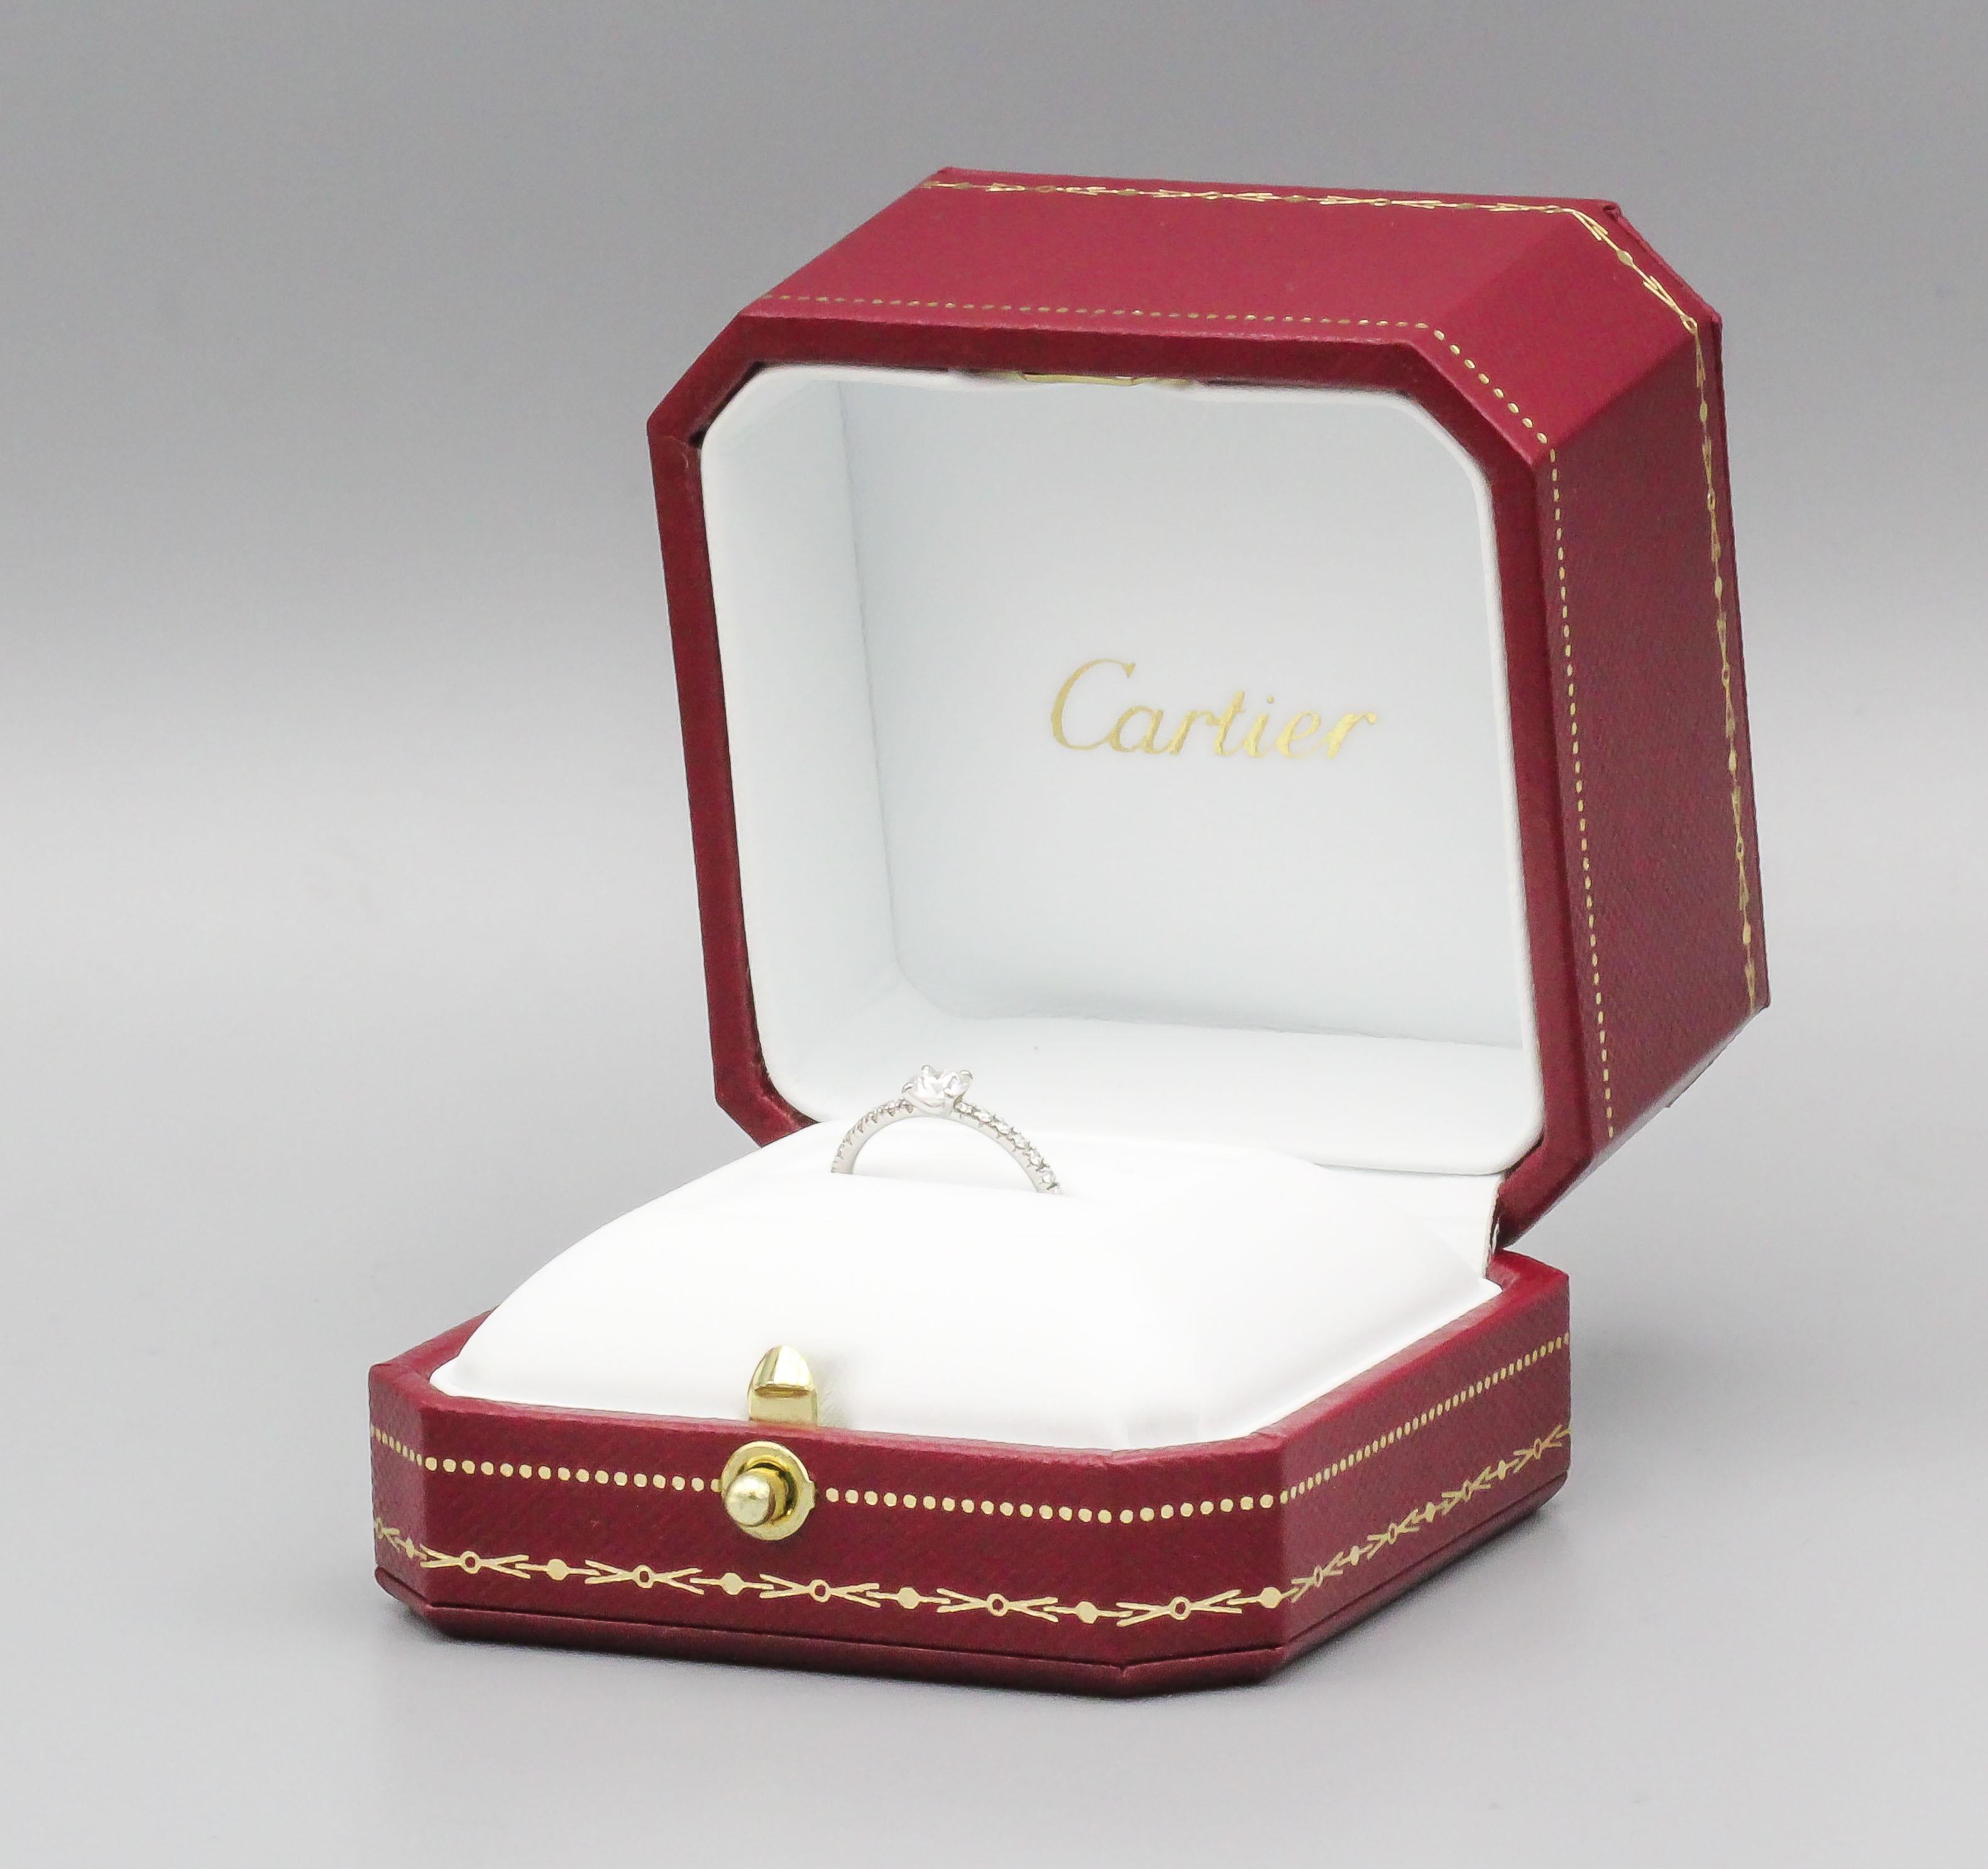 Cartier 0.30 Carat E VS1 Diamond and Platinum Engagement Ring with GIA Report For Sale 7